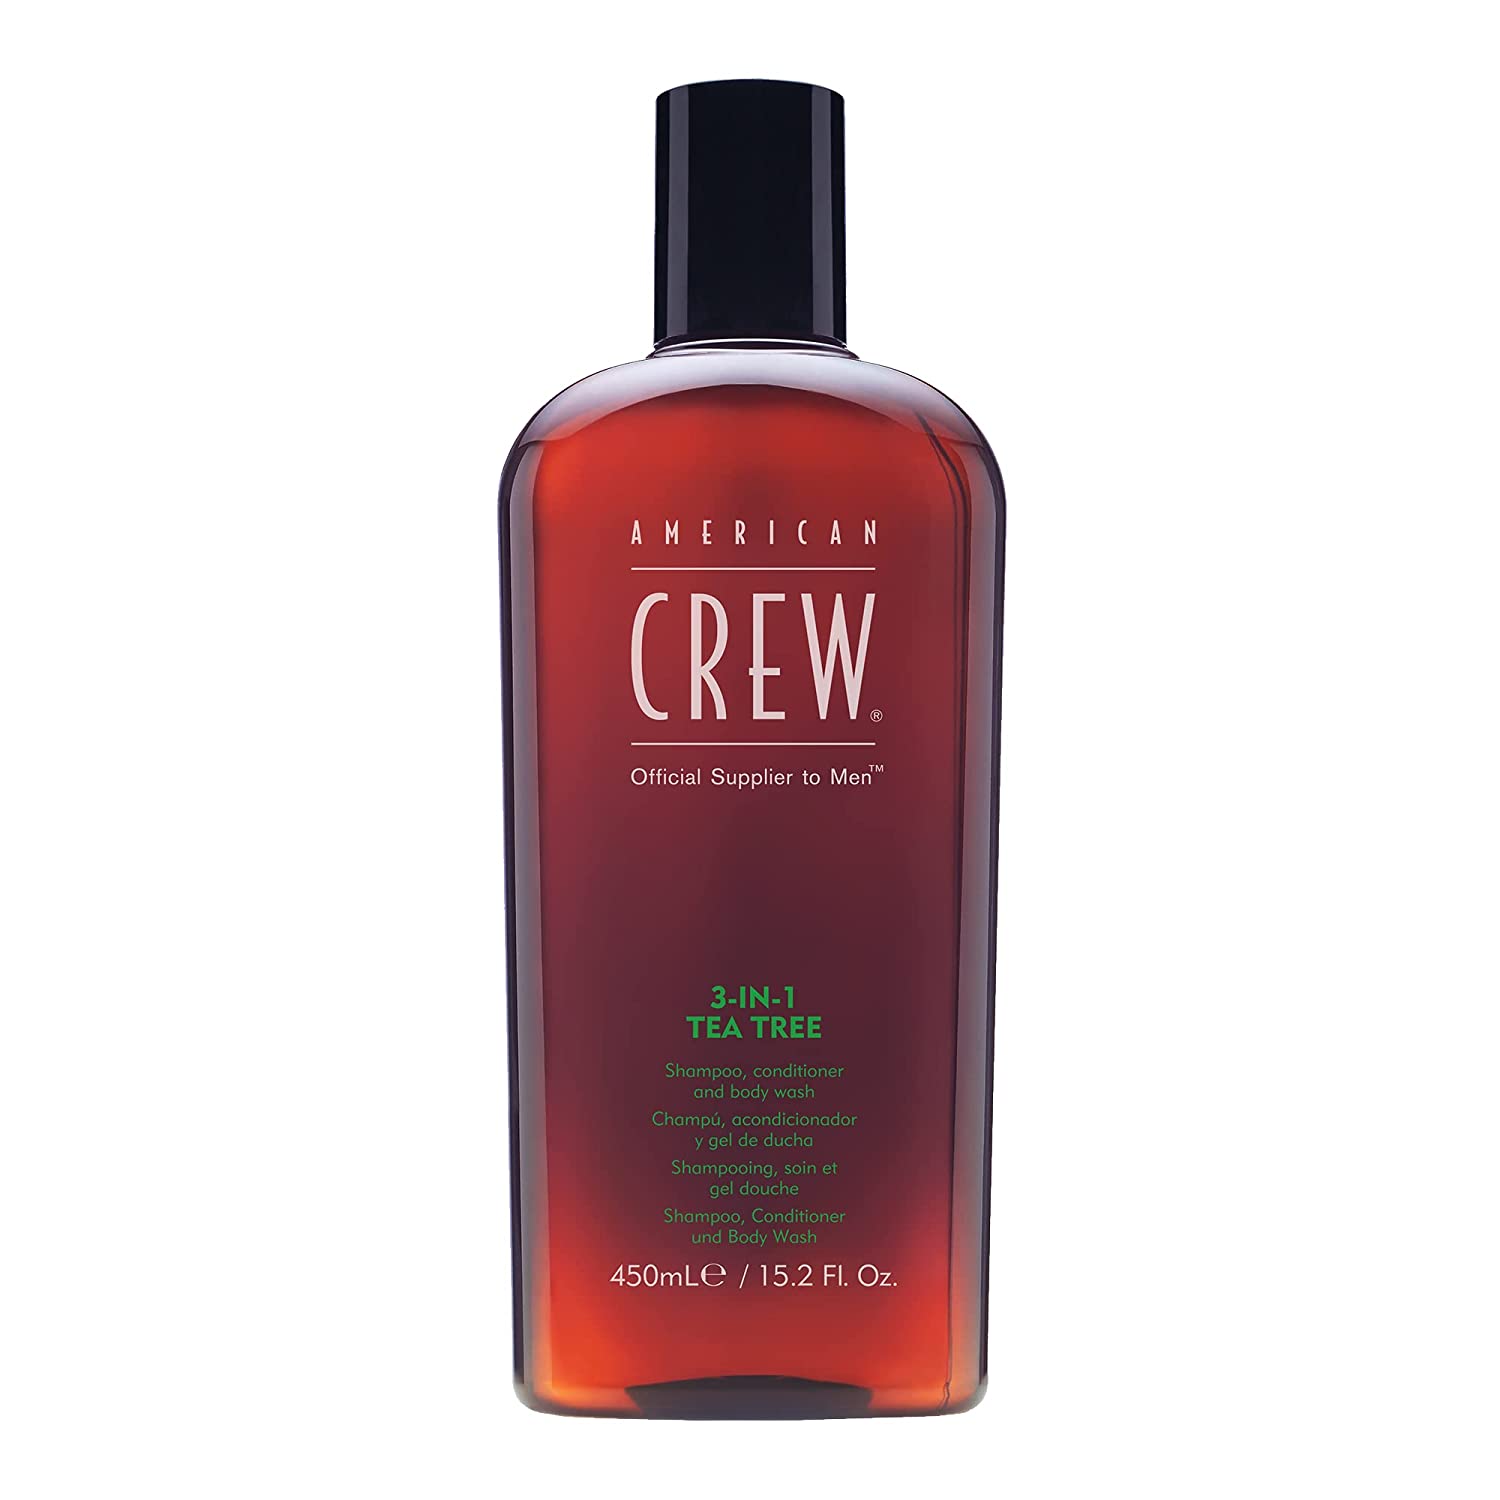 AMERICAN CREW 3-in-1 Tea Tree Shampoo, Conditioner & Body Wash with Tea Tree Oil, 450 ml, Care Shampoo and Conditioner for Men, Shower Gel for Daily Cleansing of Body and Hair